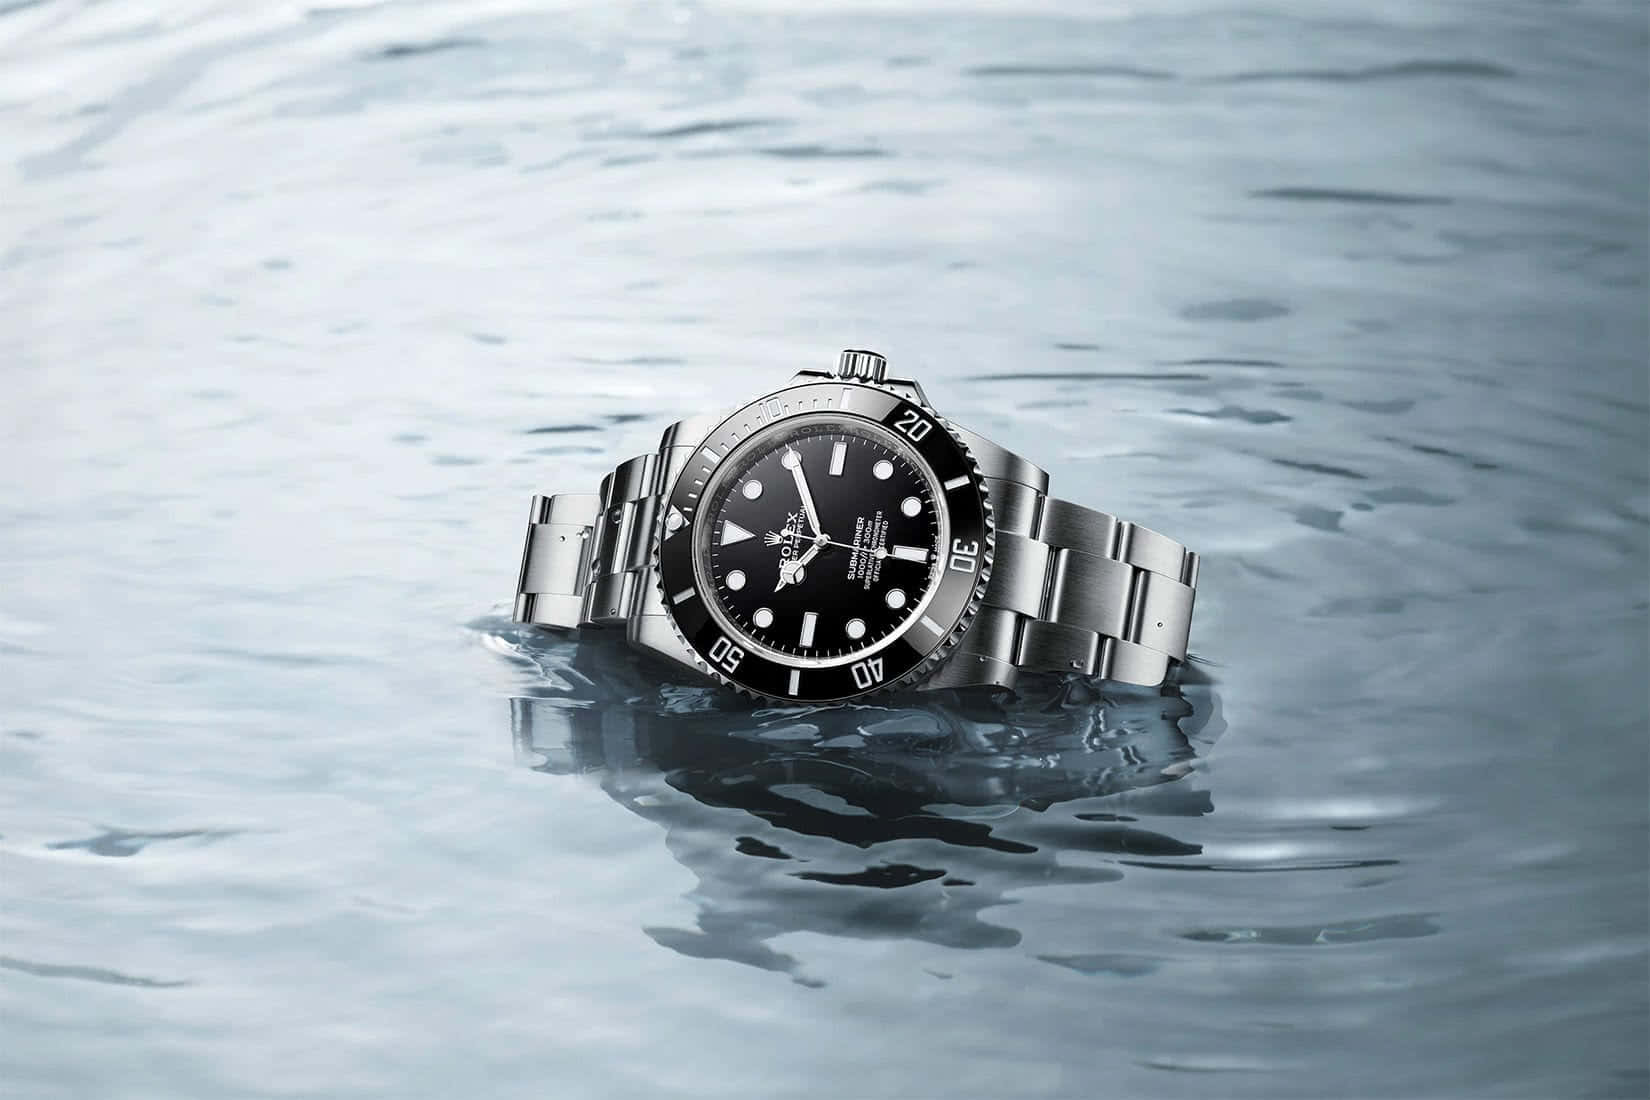 Rolex Submariner - A Black Watch Floating In Water